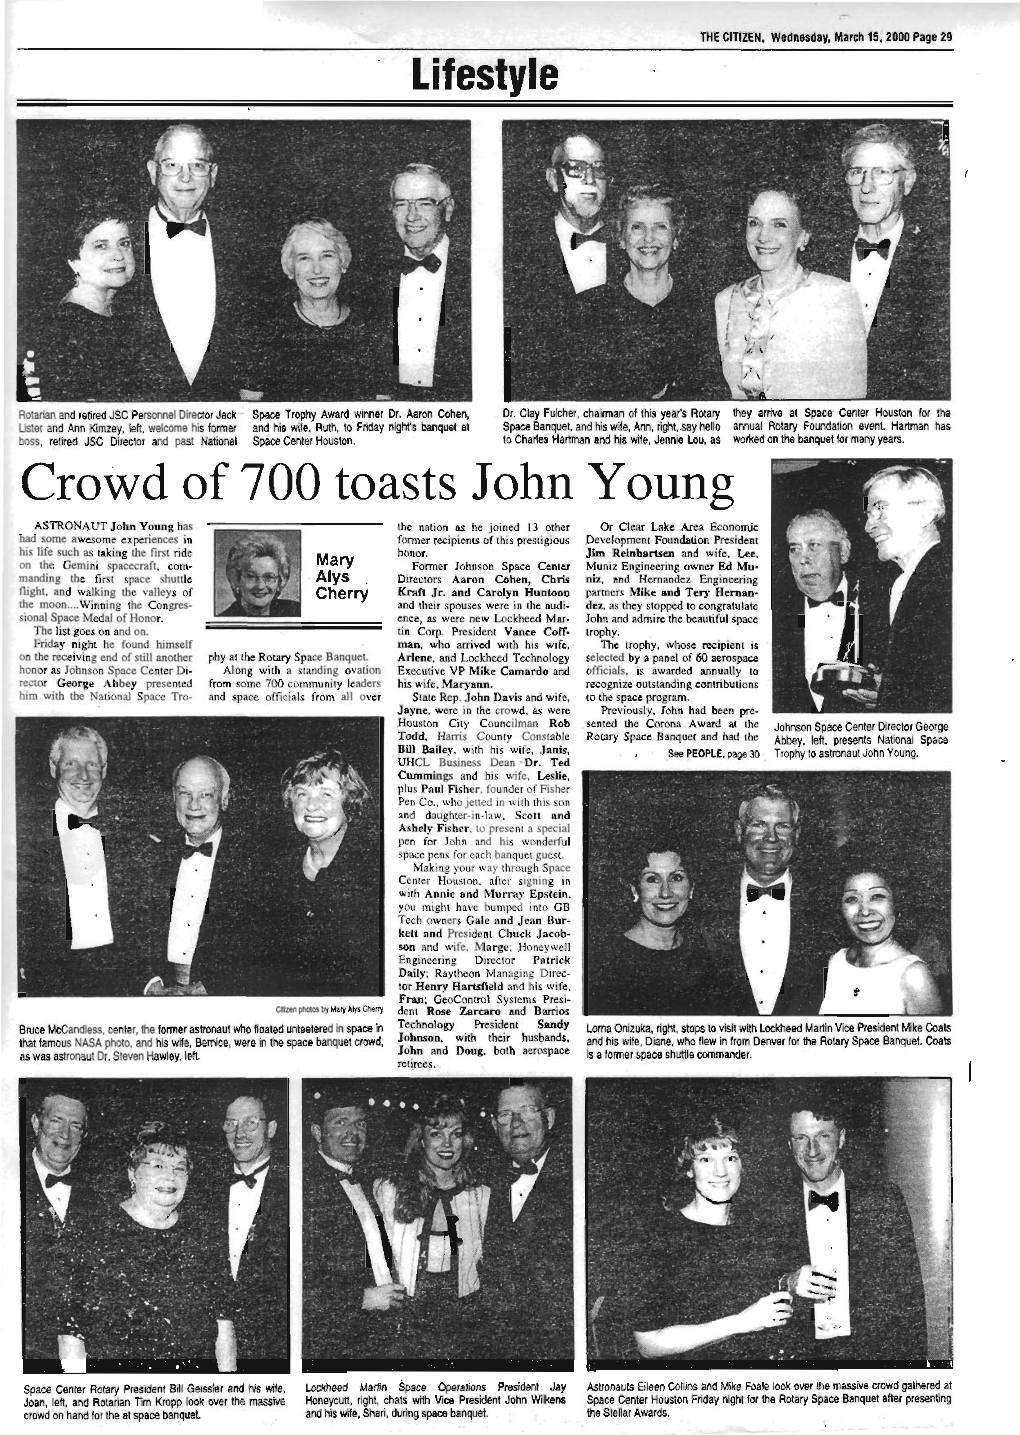 Crowd of 700 Toasts John Young